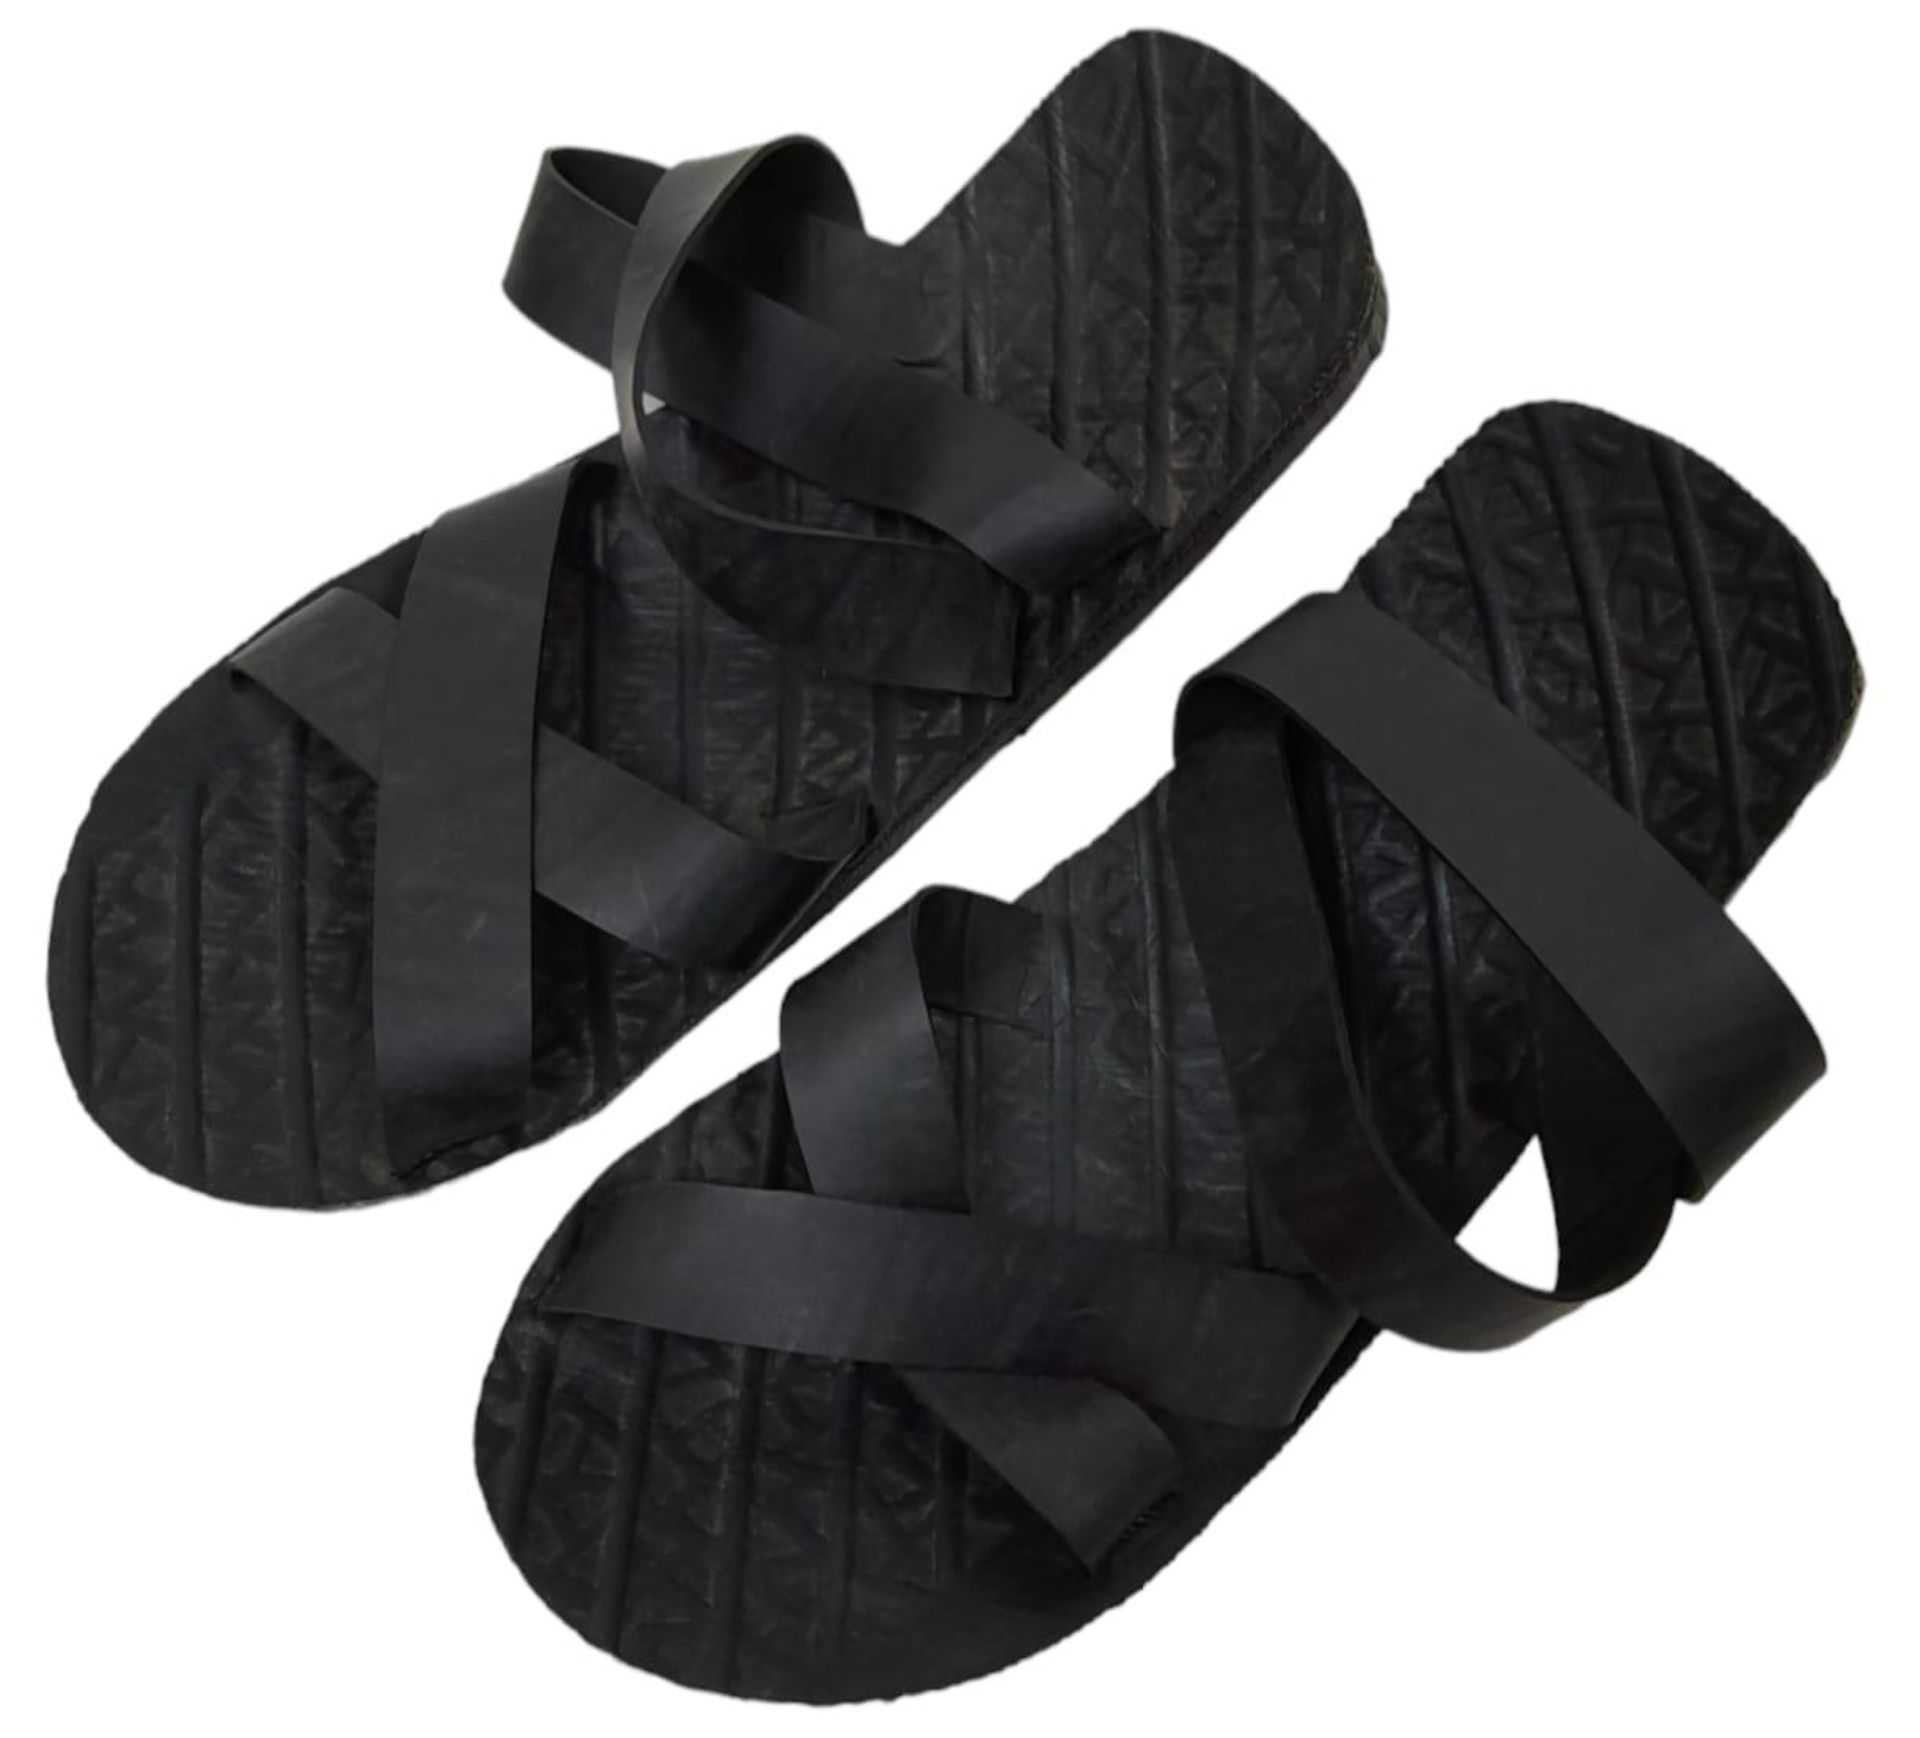 Vietnam War Era Vietcong “Ho Chi Minh” Sandals made from old truck tyres. - Image 2 of 4